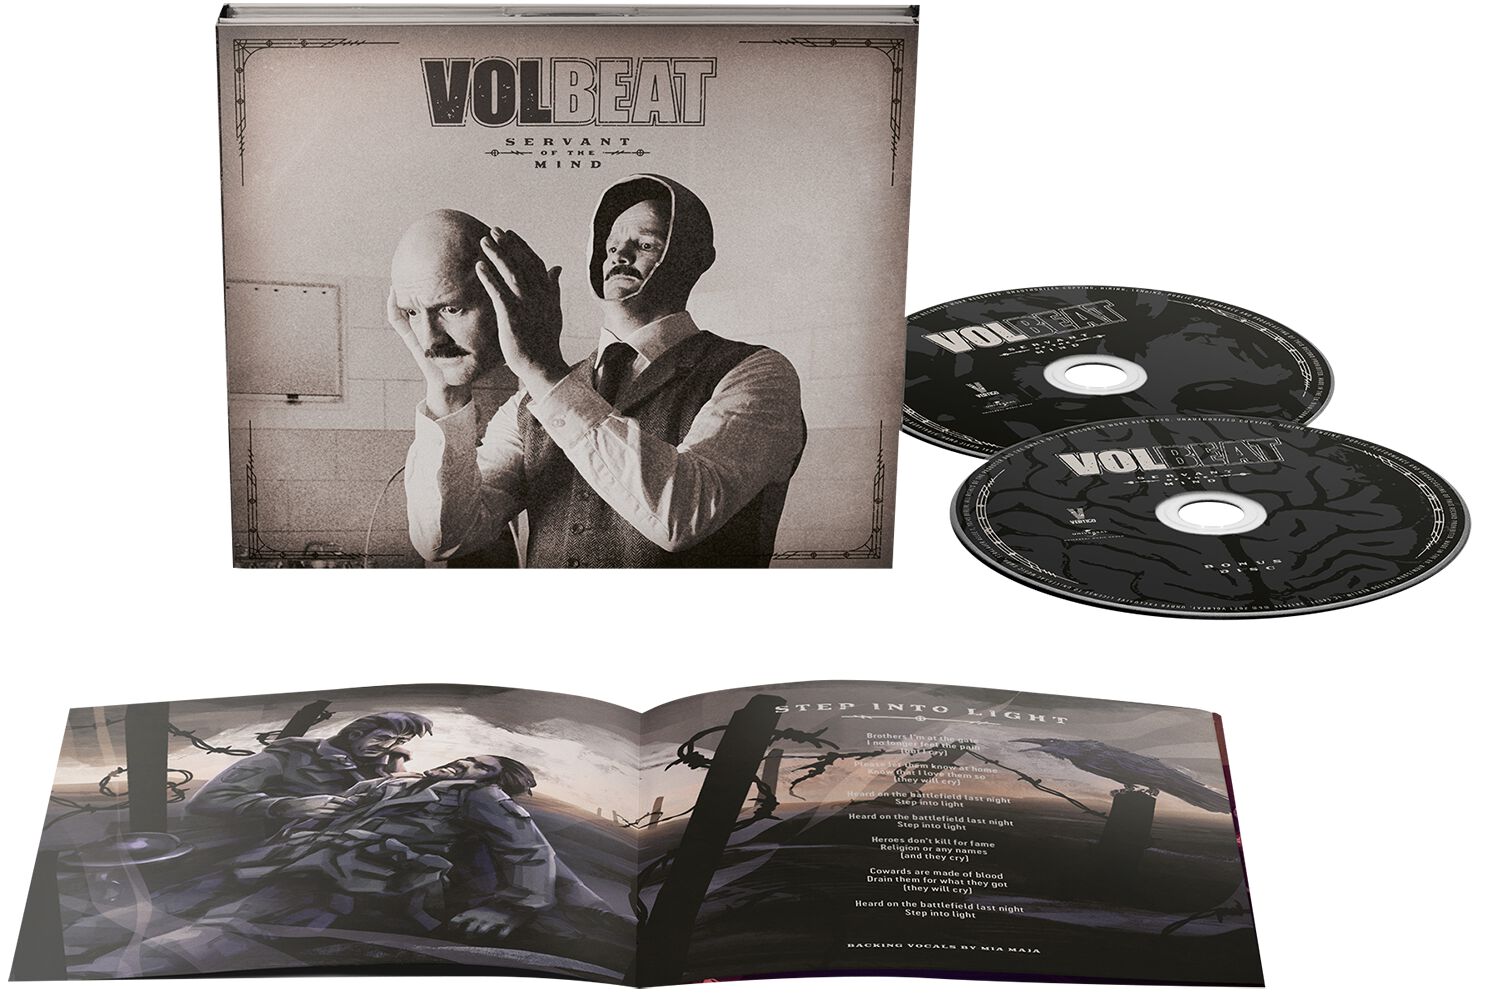 Image of Volbeat Servant of the mind 2-CD Standard